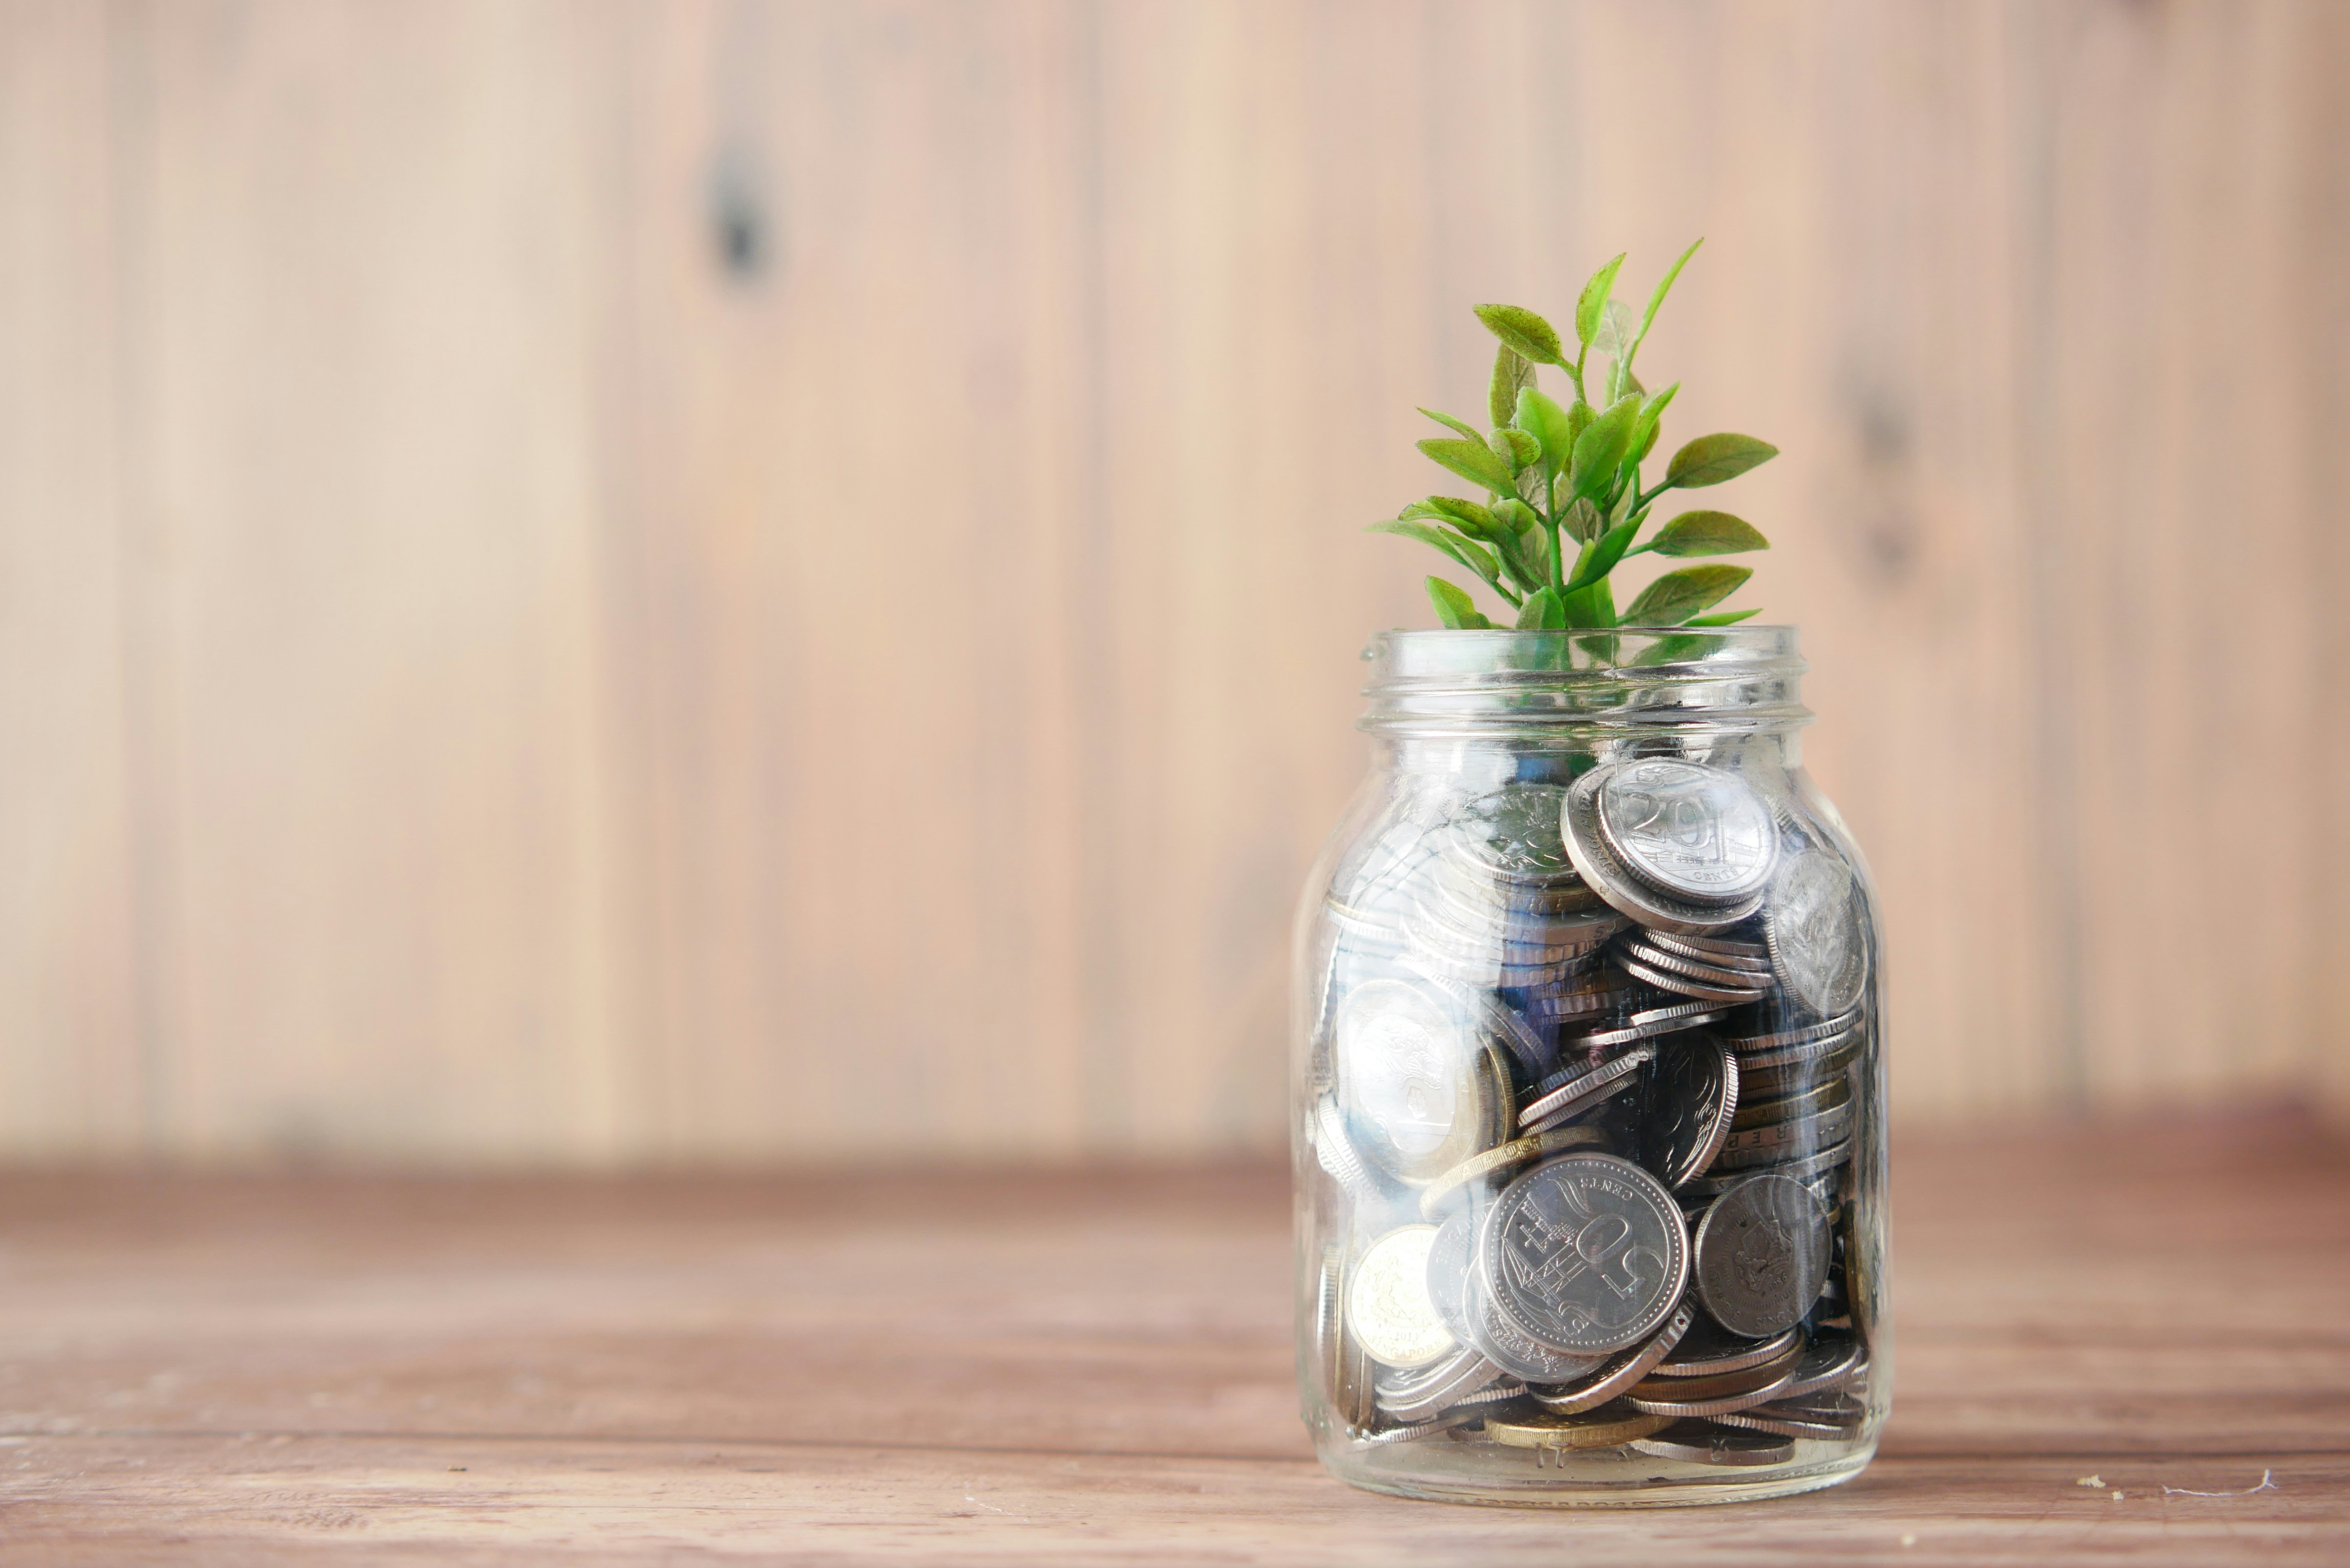 A seedling sprouting out of a jar of money